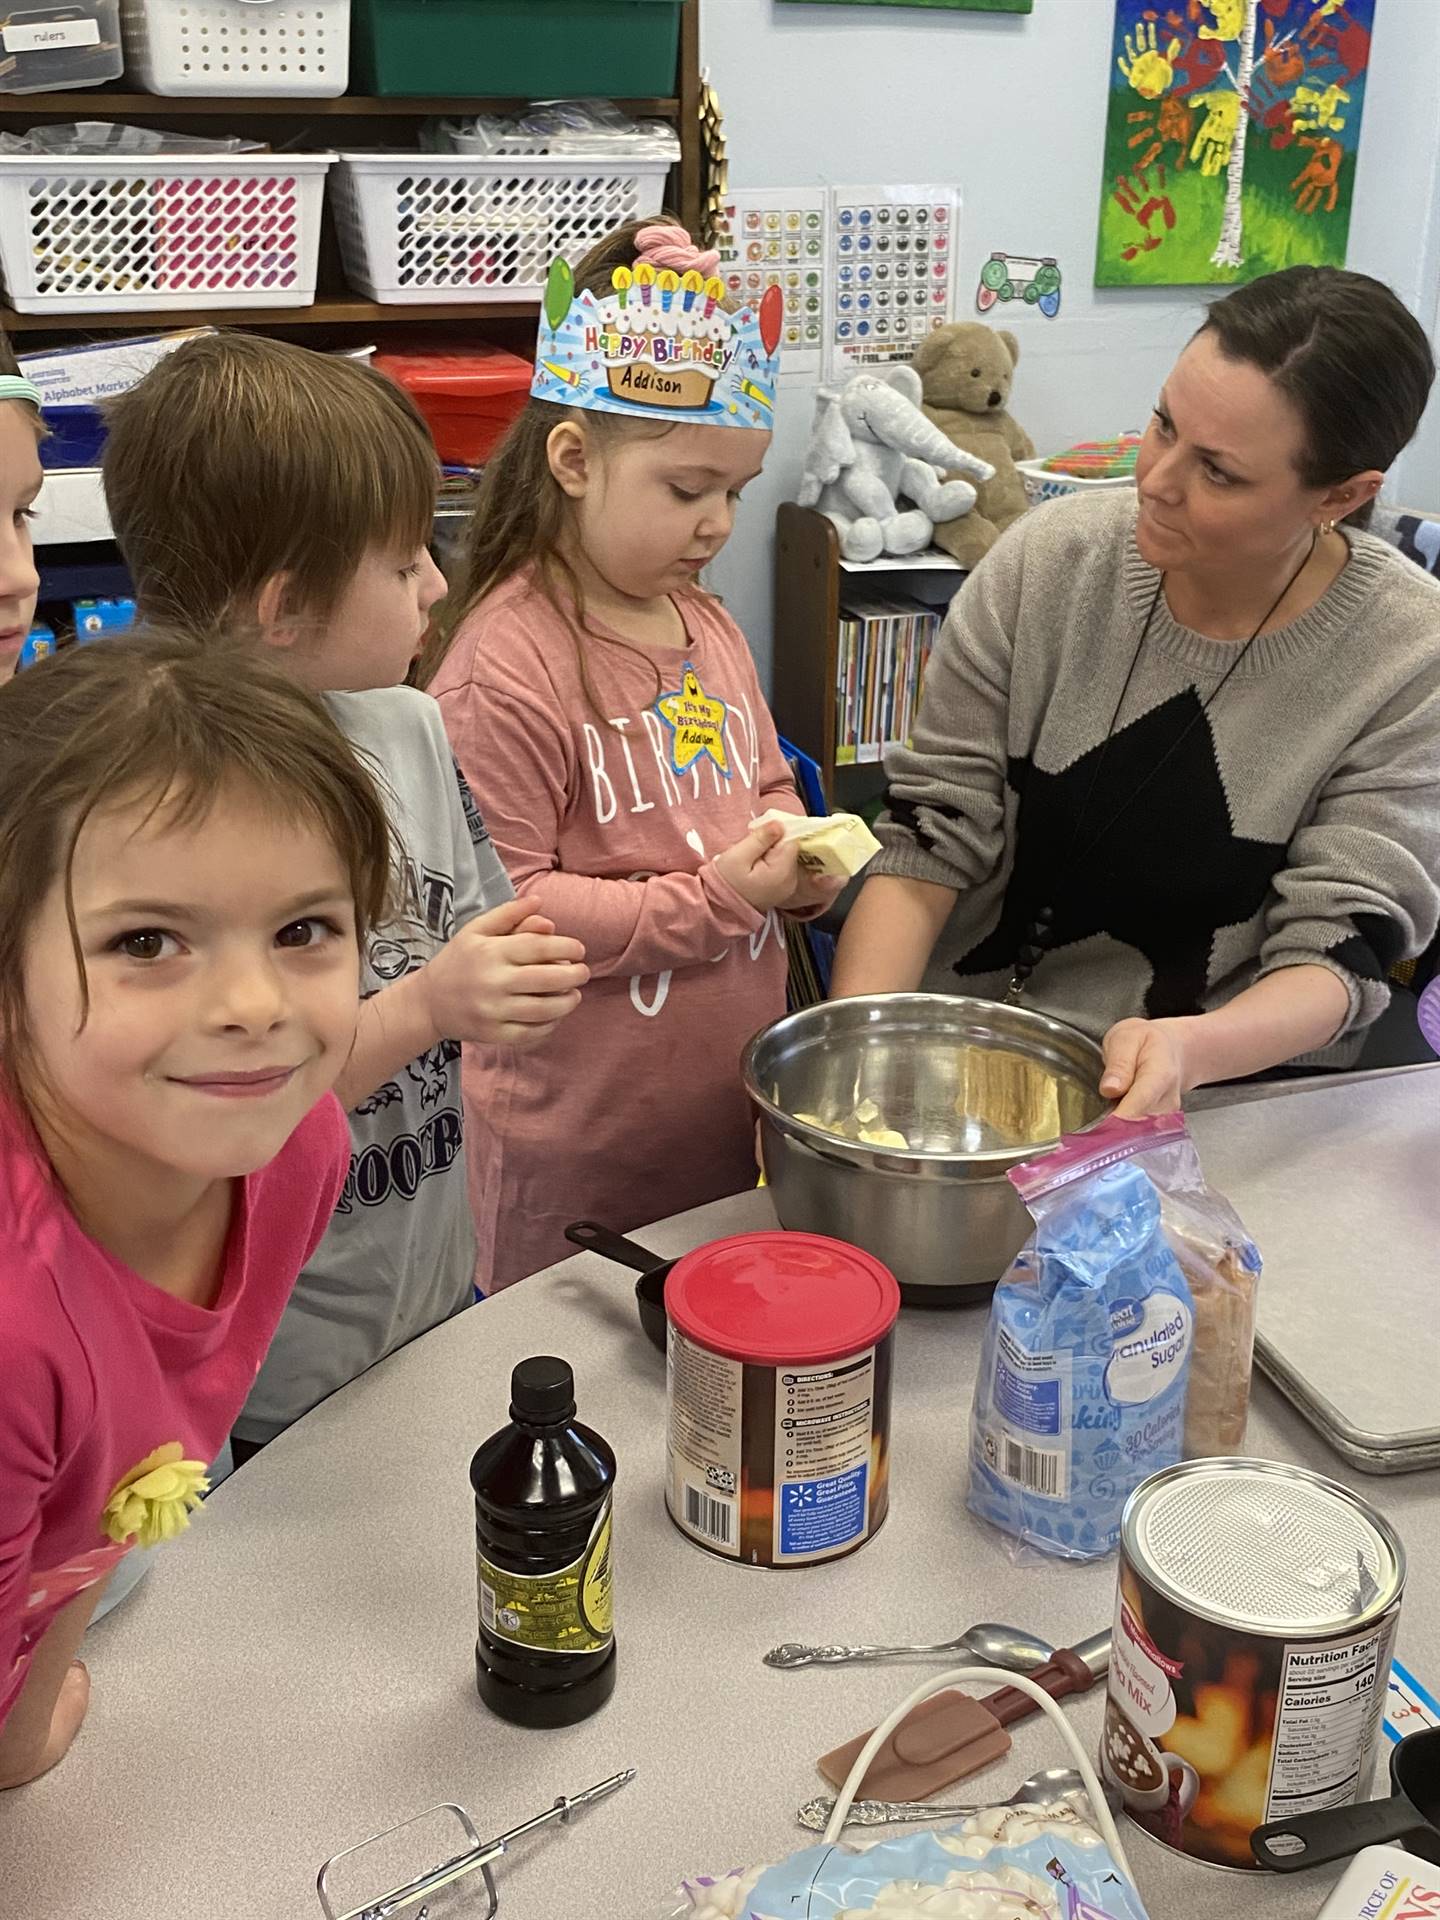 students with teacher mixing cookie ingredients.